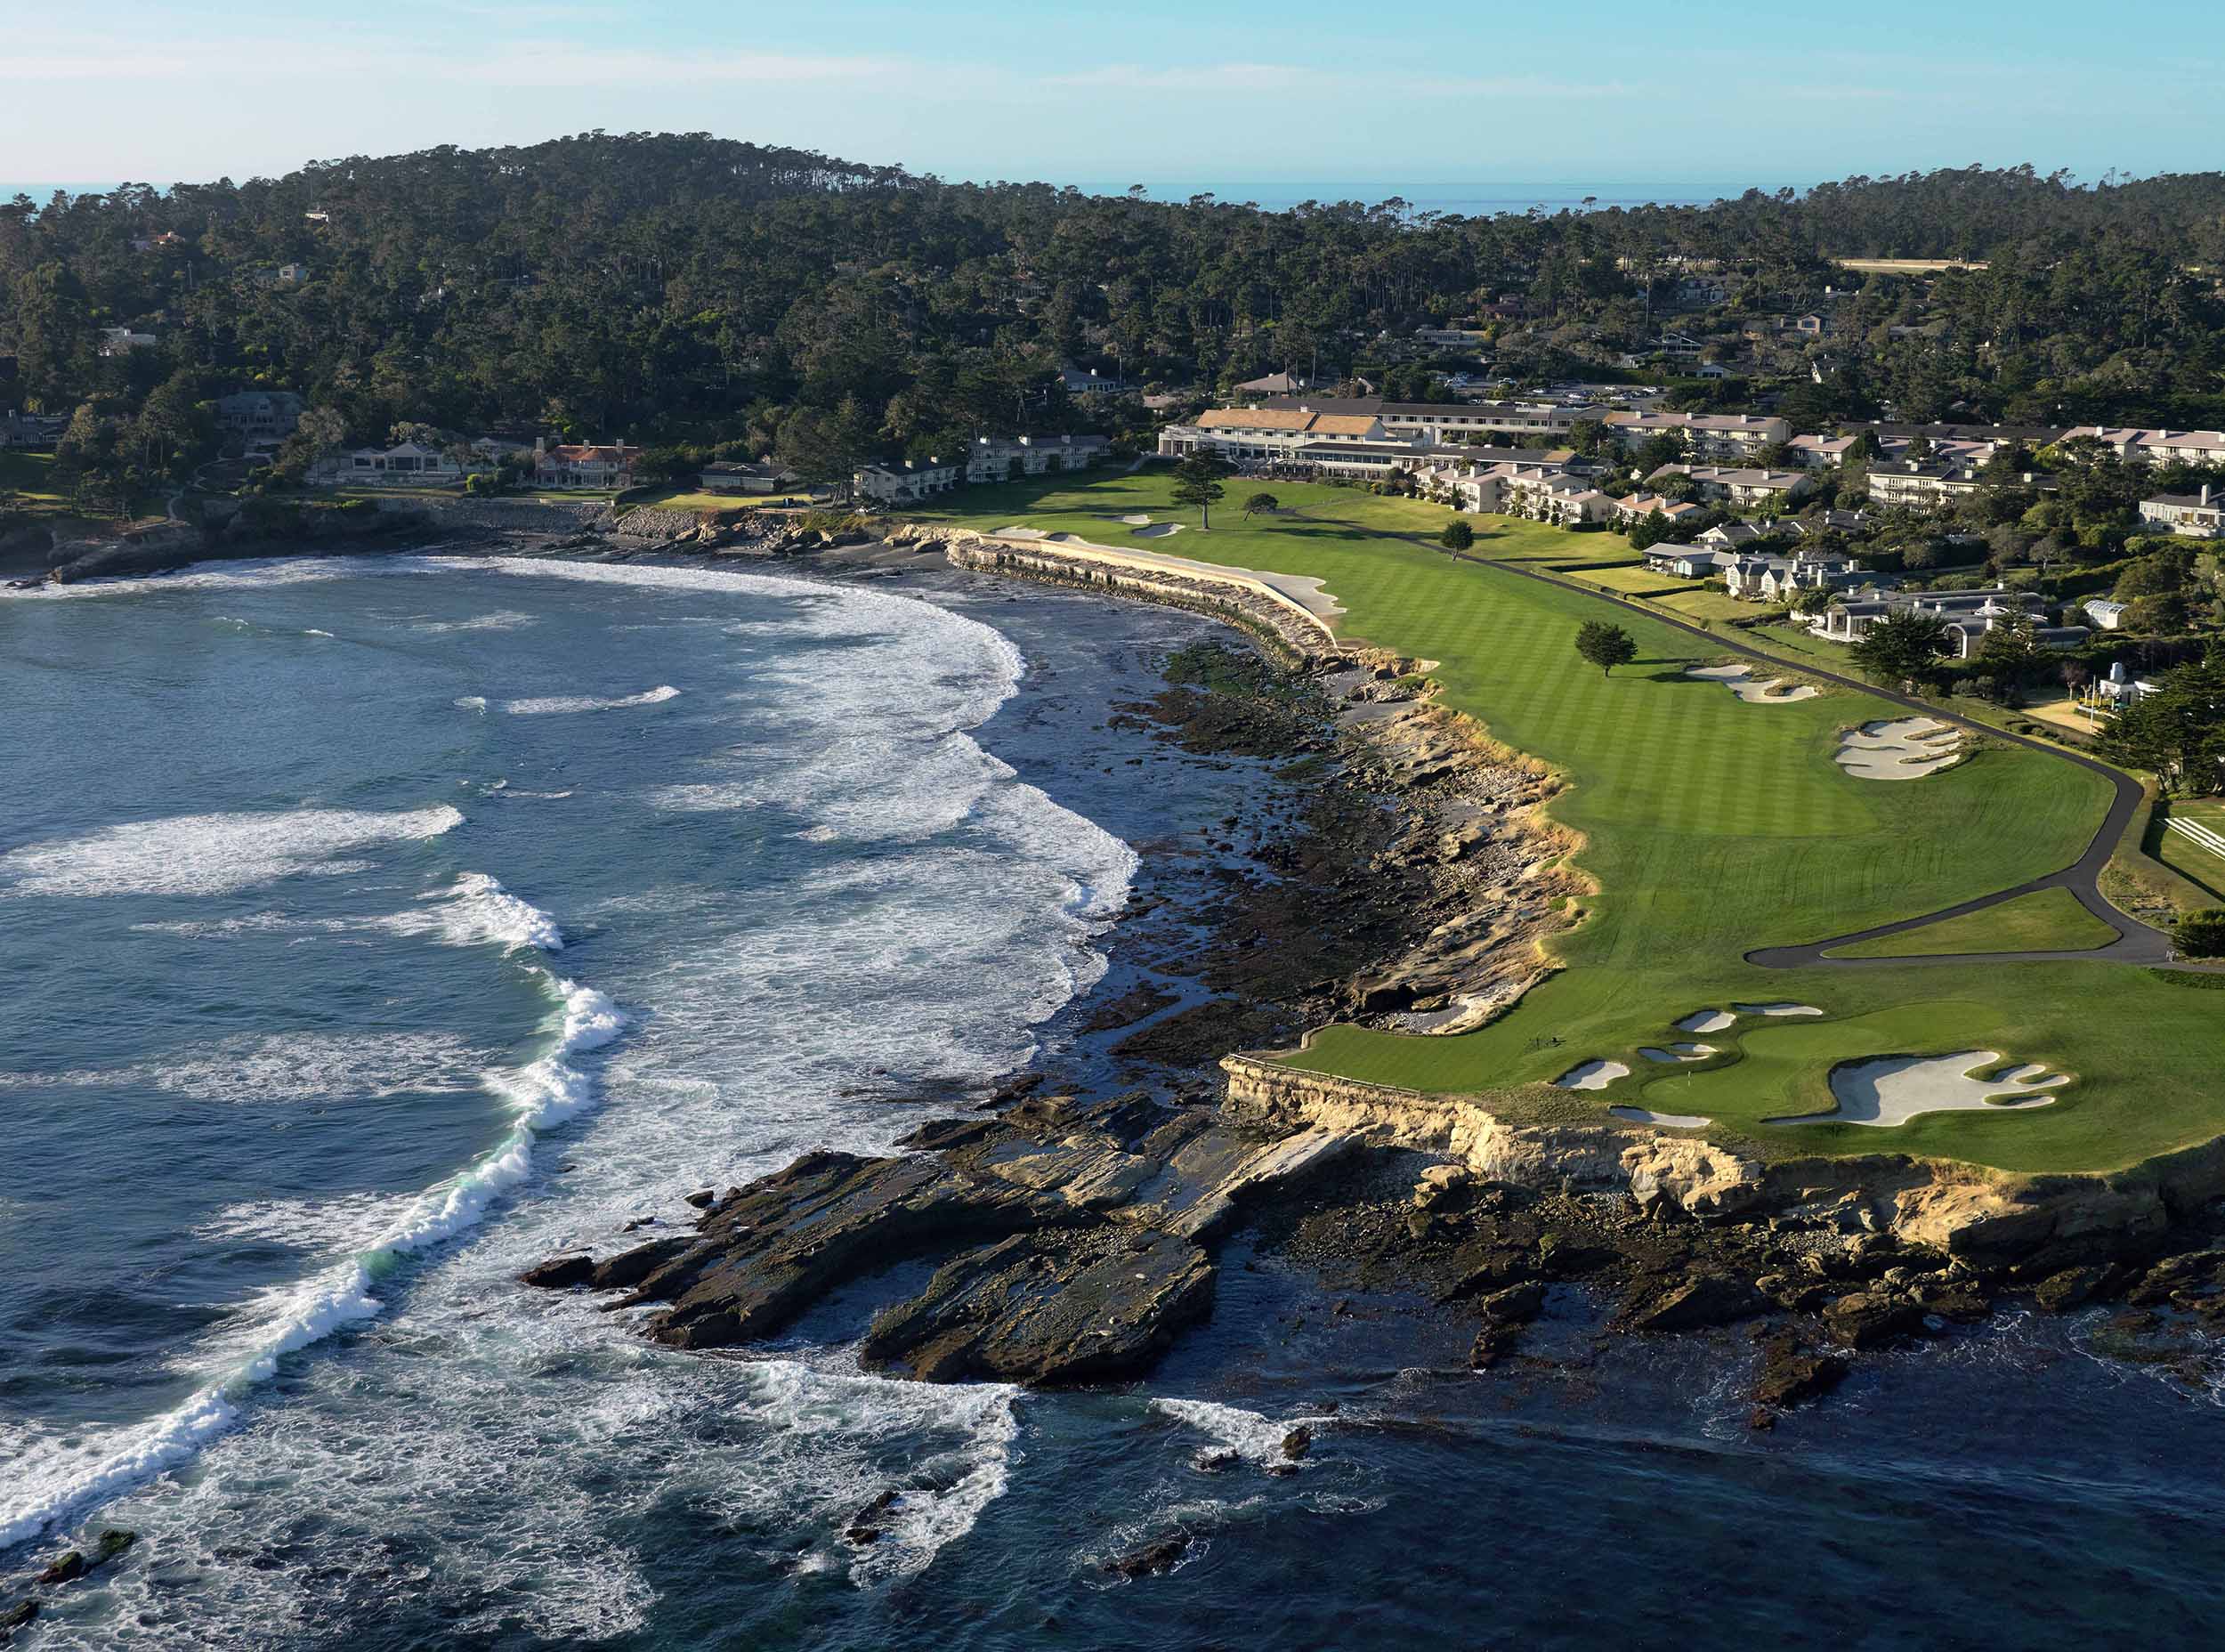 10 Things You Think About When You See Pebble Beach From the Sky